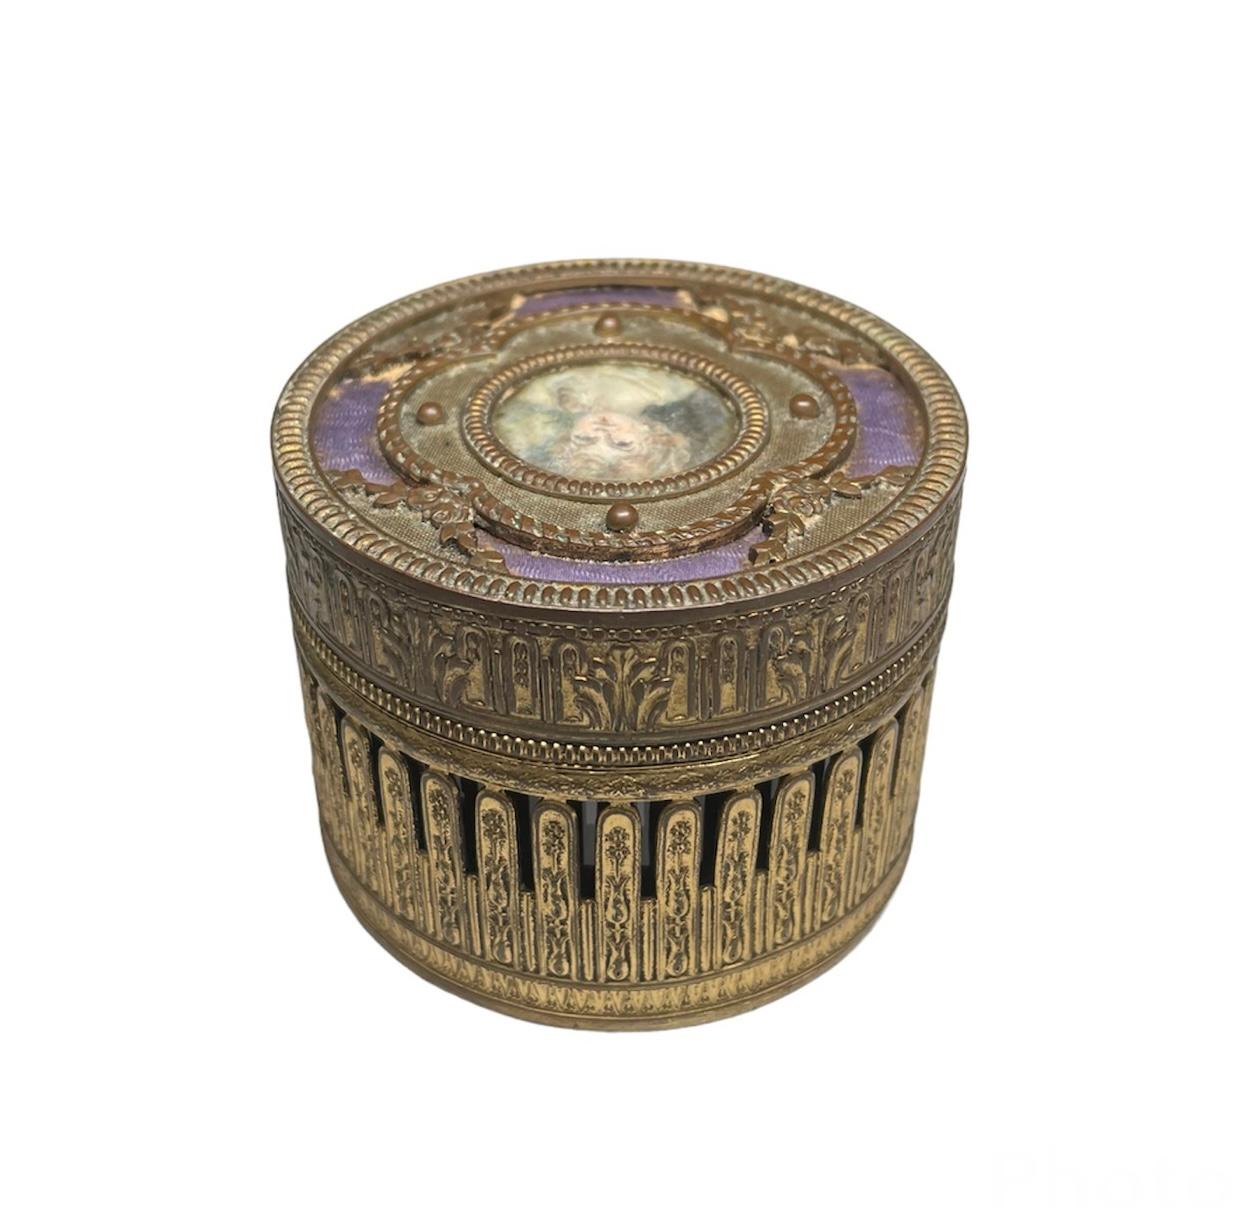 This is a French patinated bronze metal round trinket lidded box. It depicts a pierced round metal box decorated with a relief of foliages. The lid is adorned in the center with a hand painted portrait of a young girl enframed with a quatrefoil.